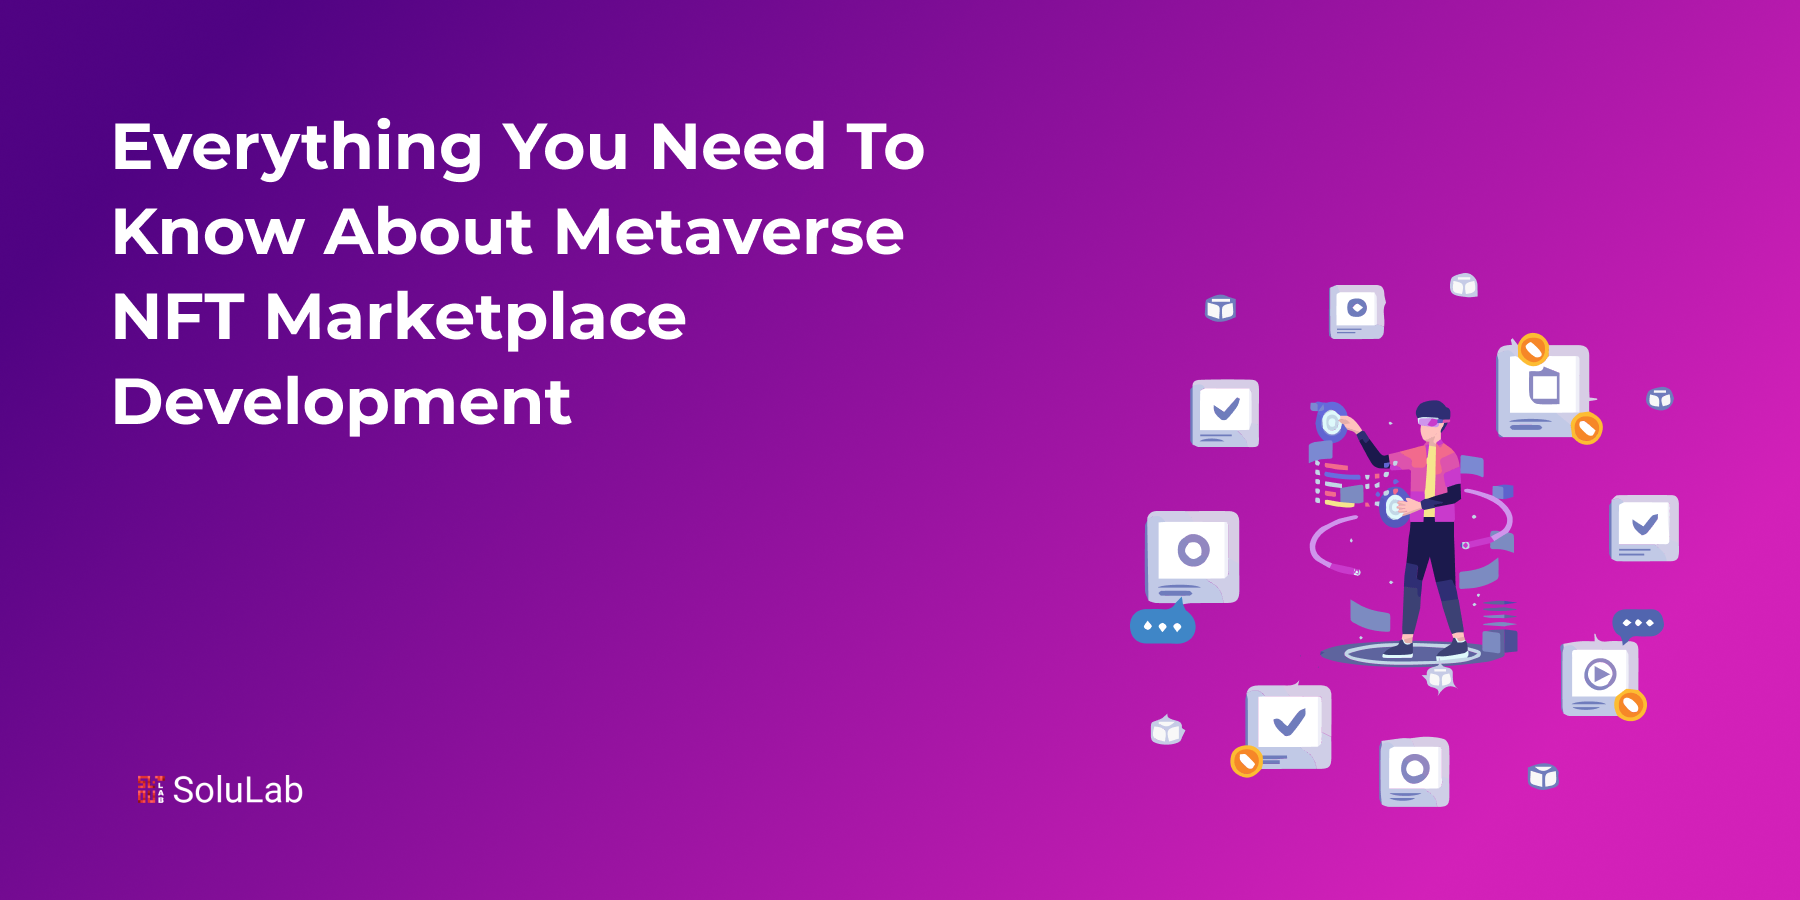 Everything You Need to Know About Metaverse NFT Marketplace Development